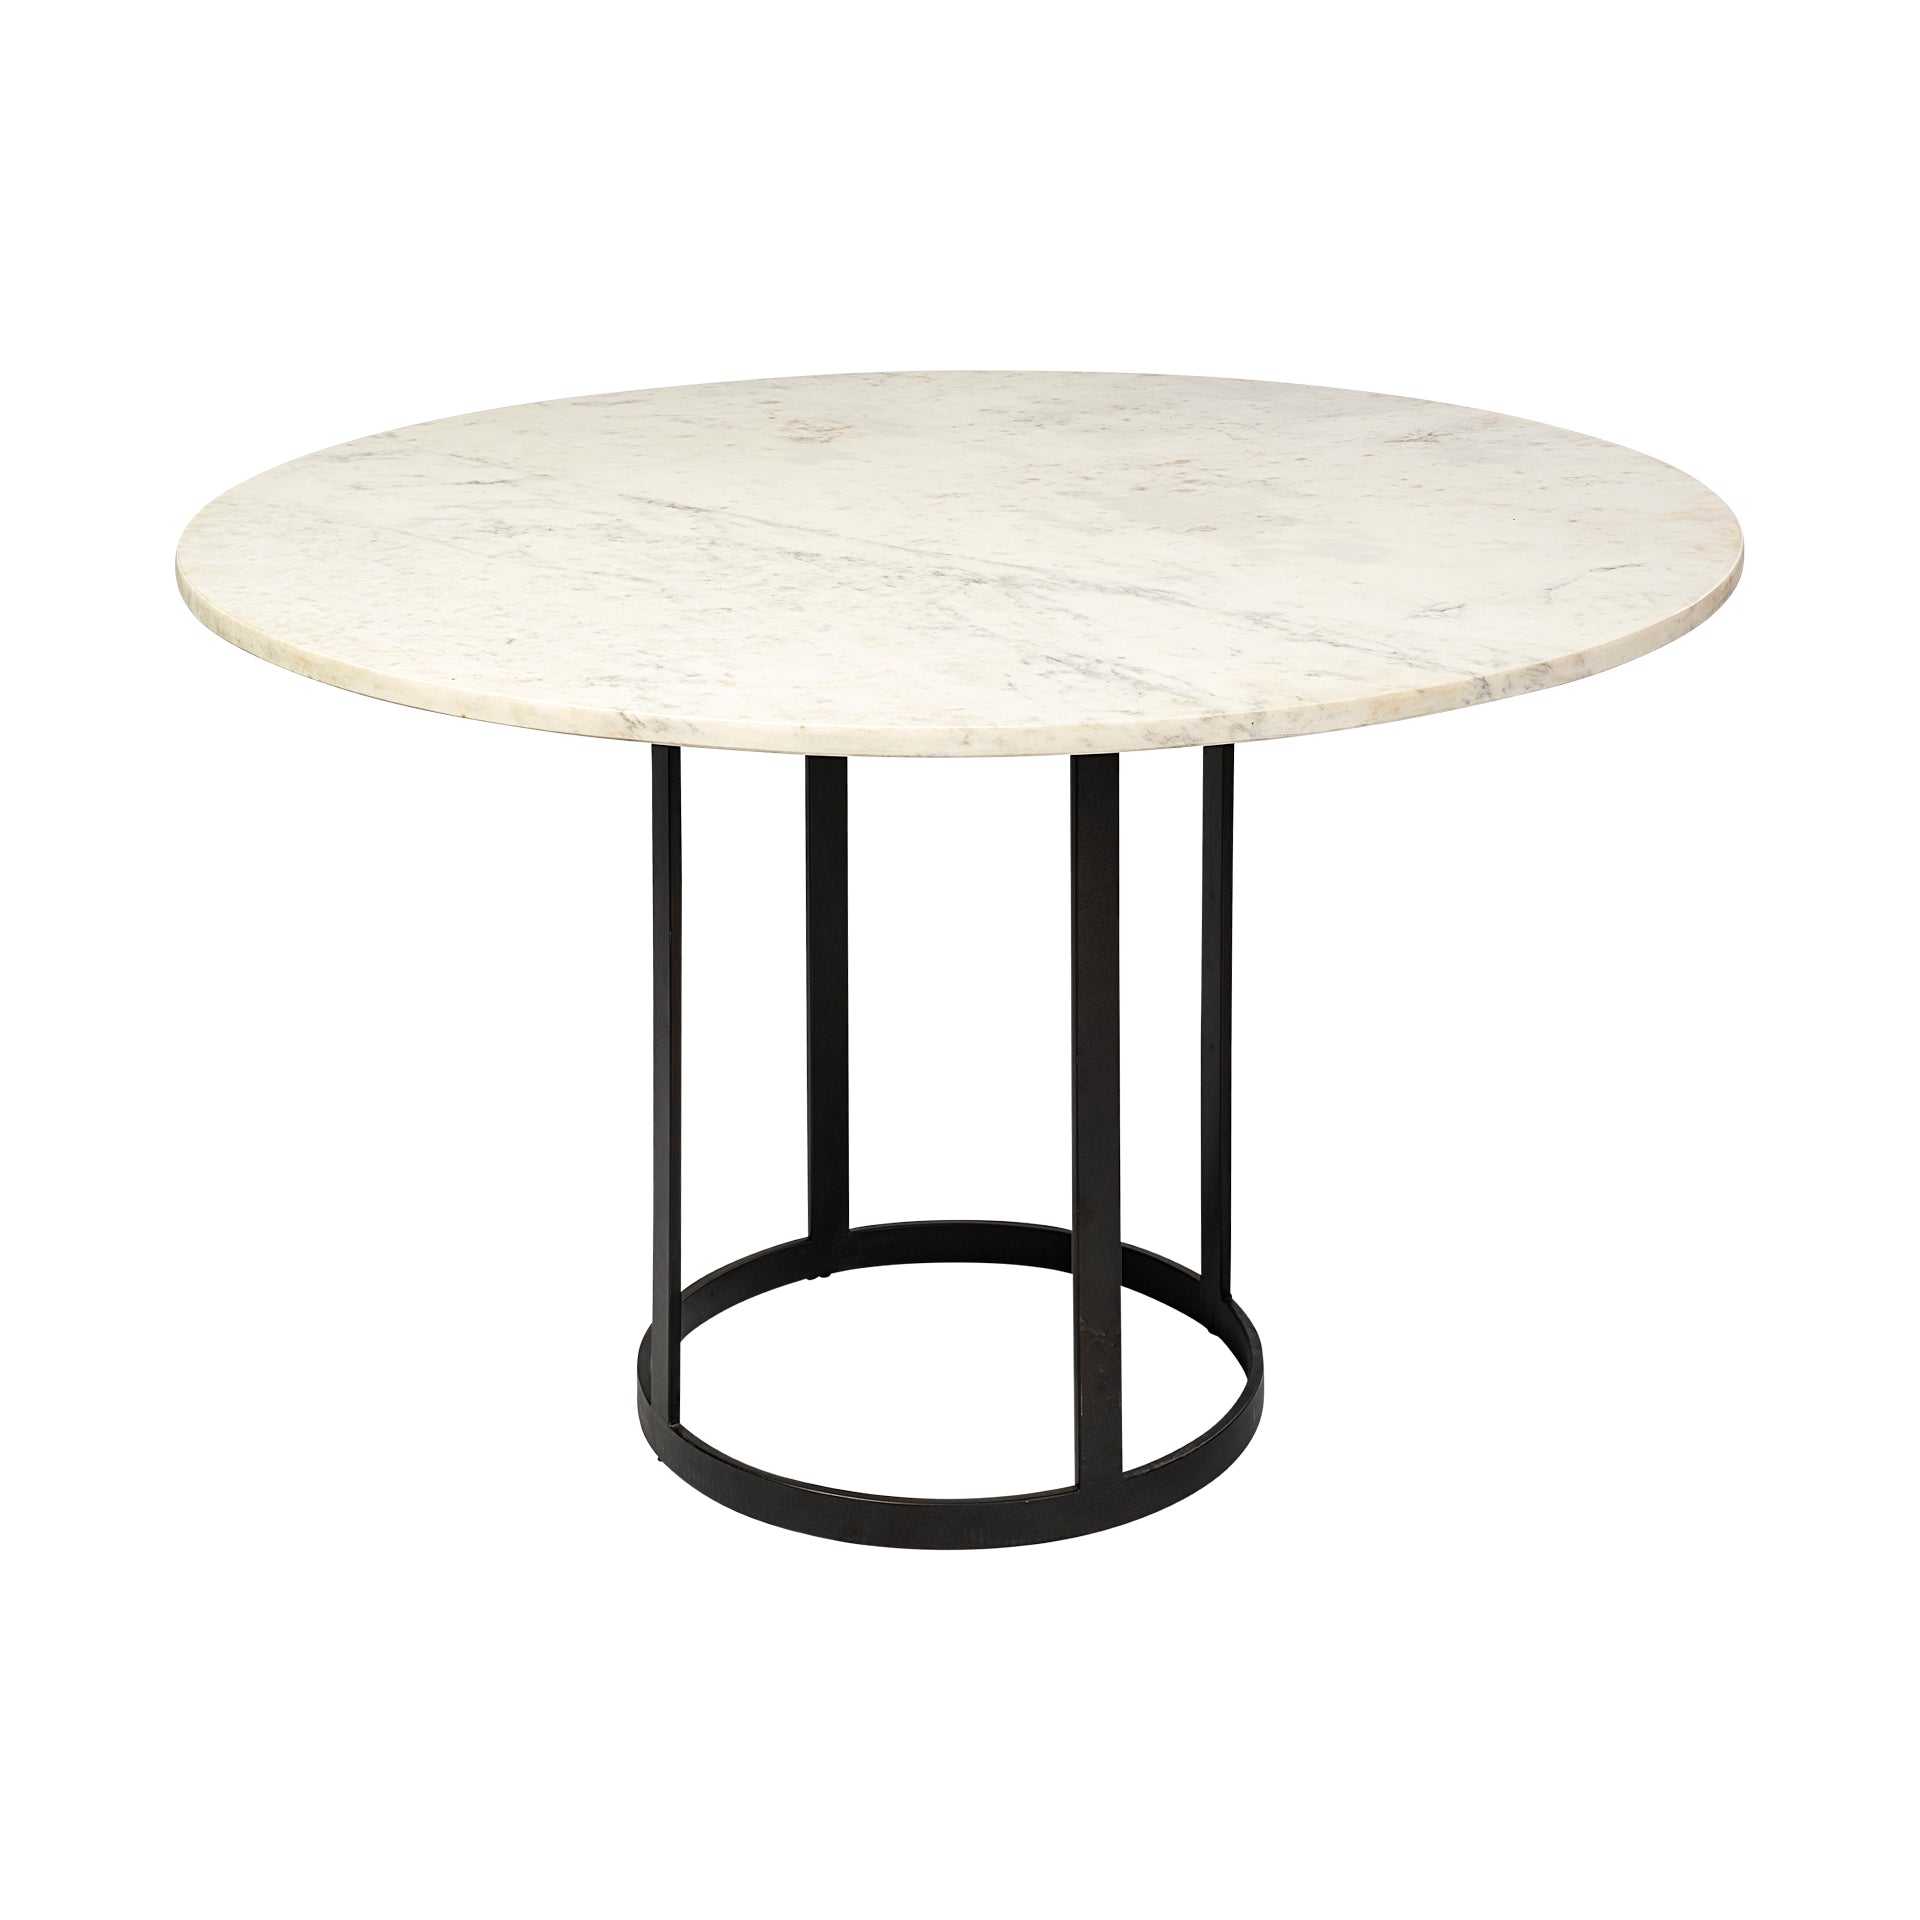 Tanner II Round White Dining Table